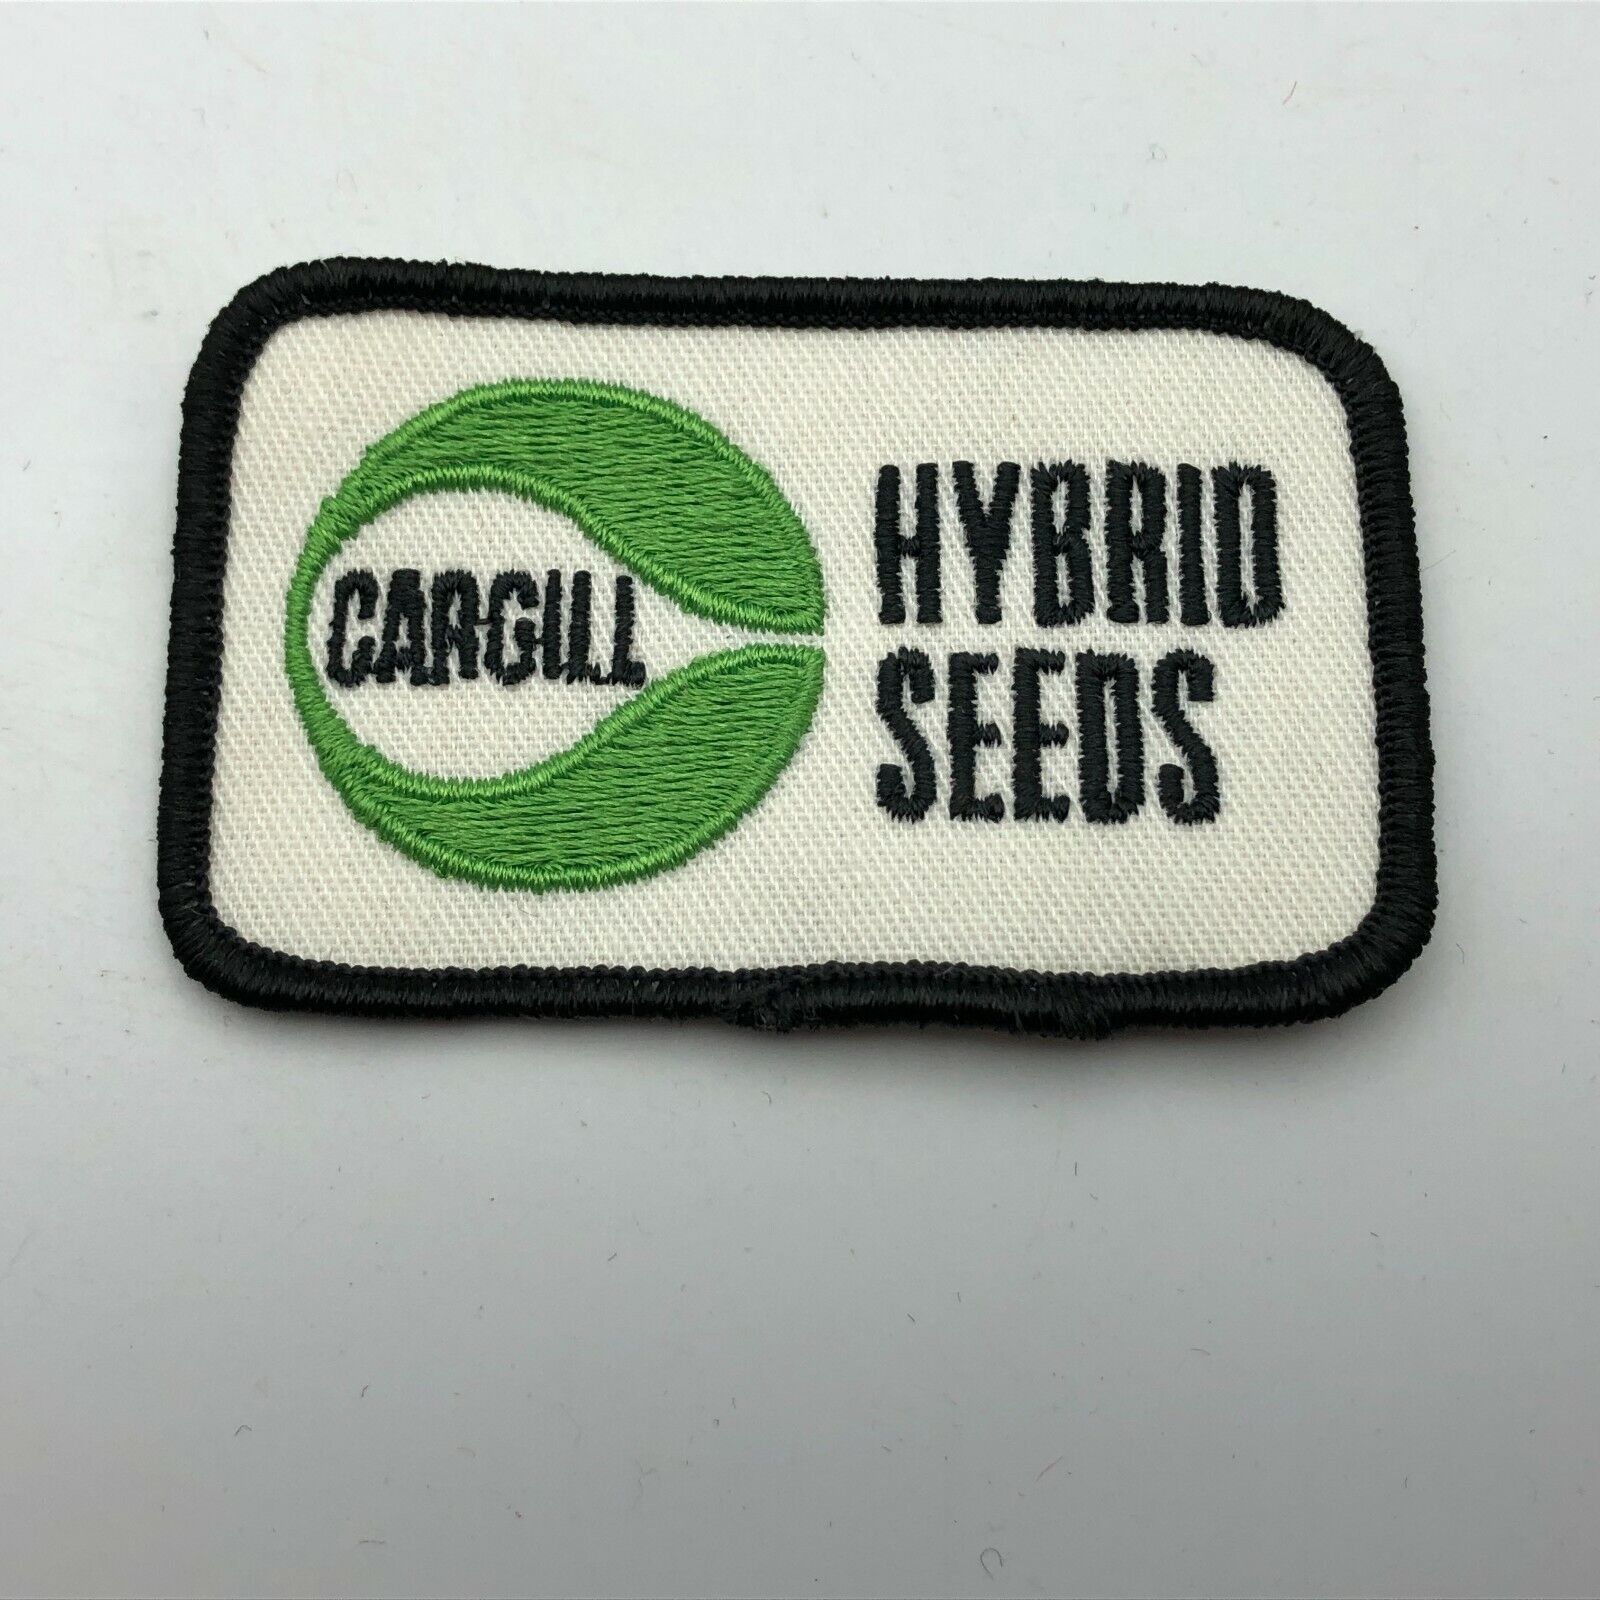 CARGILL HYBRID Patch Seeds Agriculture 2\